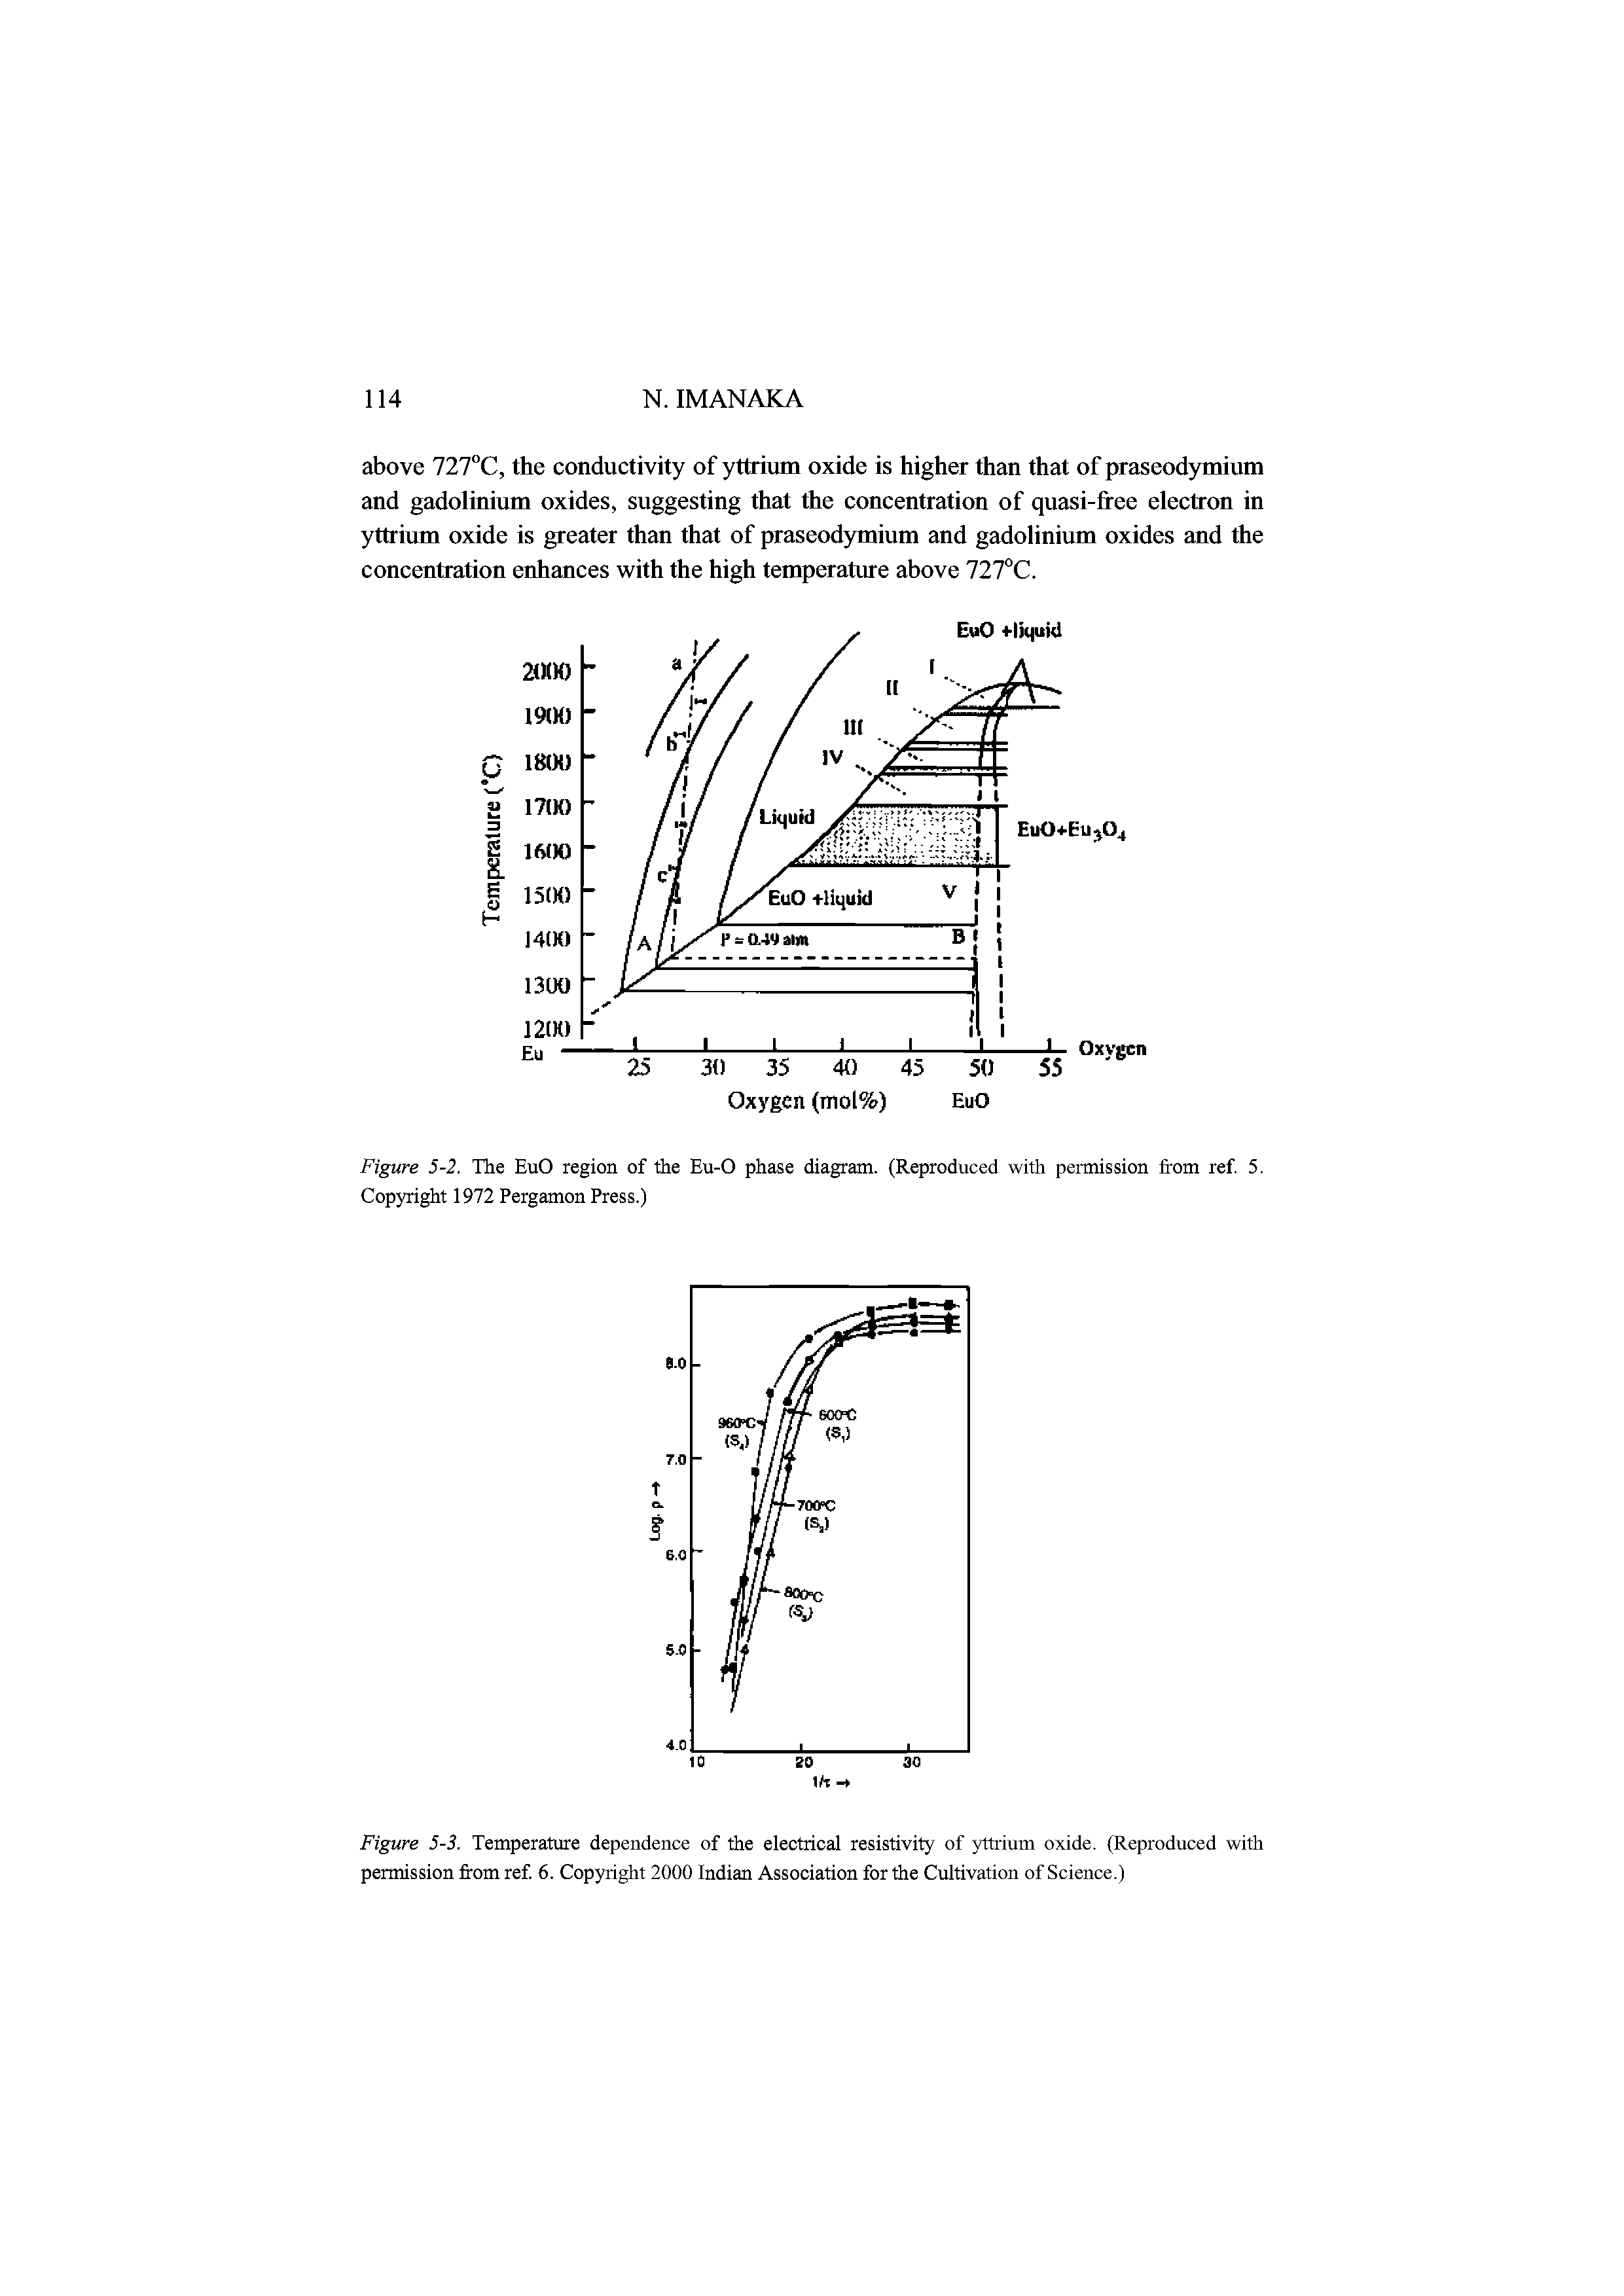 Figure 5-3. Temperature dependence of the electrical resistivity of yttrium oxide. (Reproduced with permission from ref 6. Copyright 2000 Indian Association for the Cultivation of Science.)...